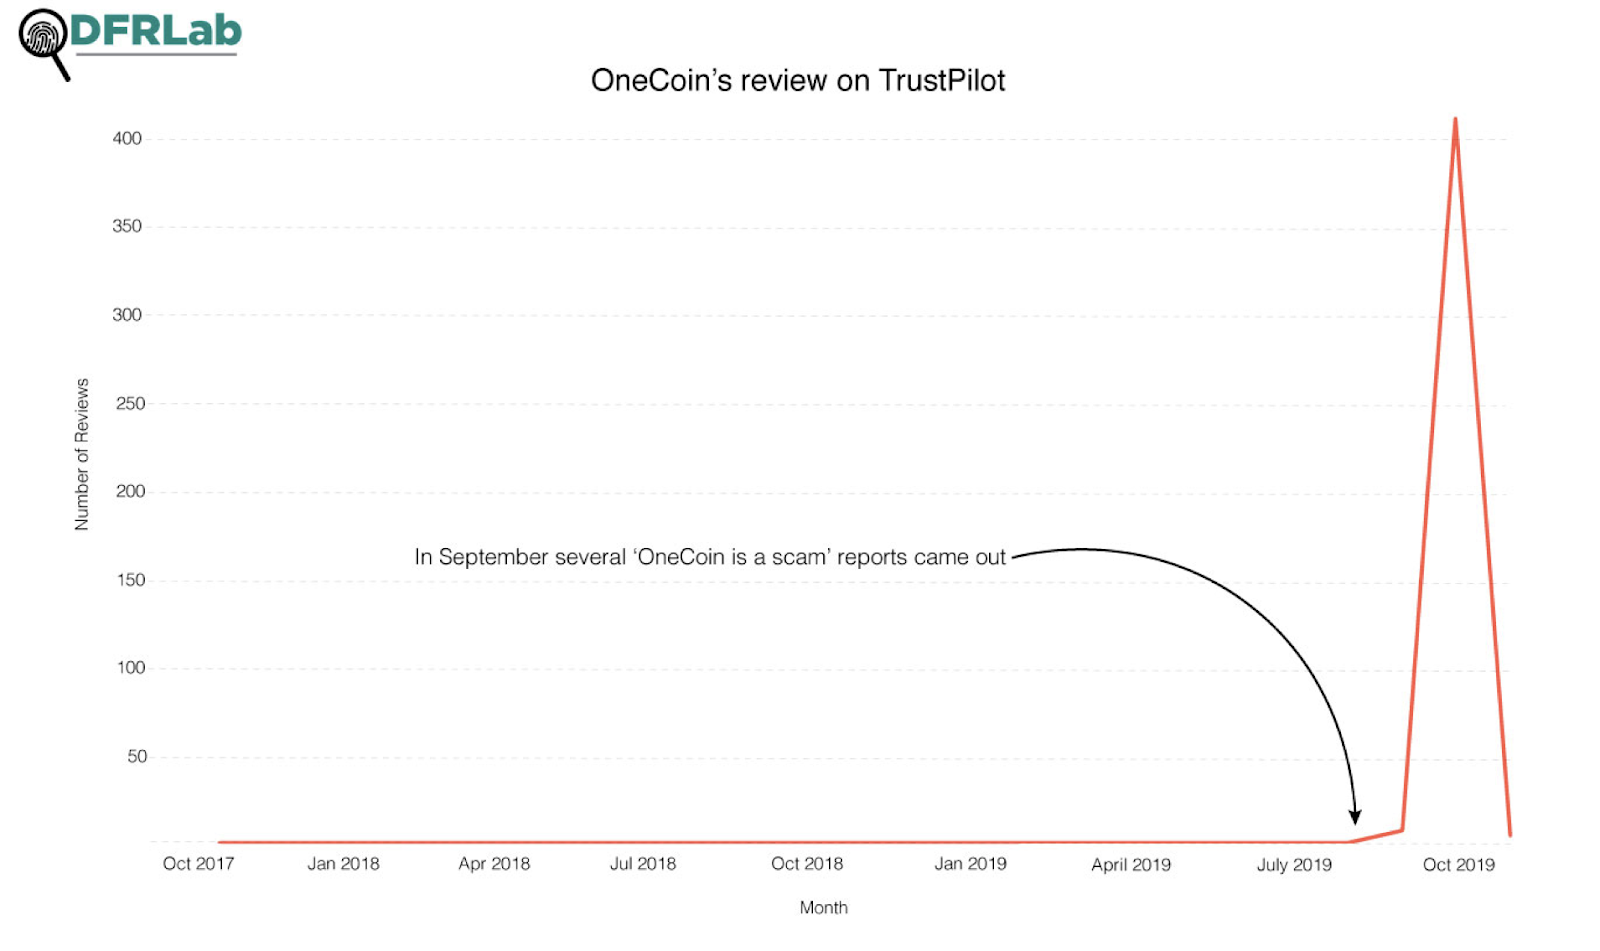 OneCoin’s TrustPilot reviews over time